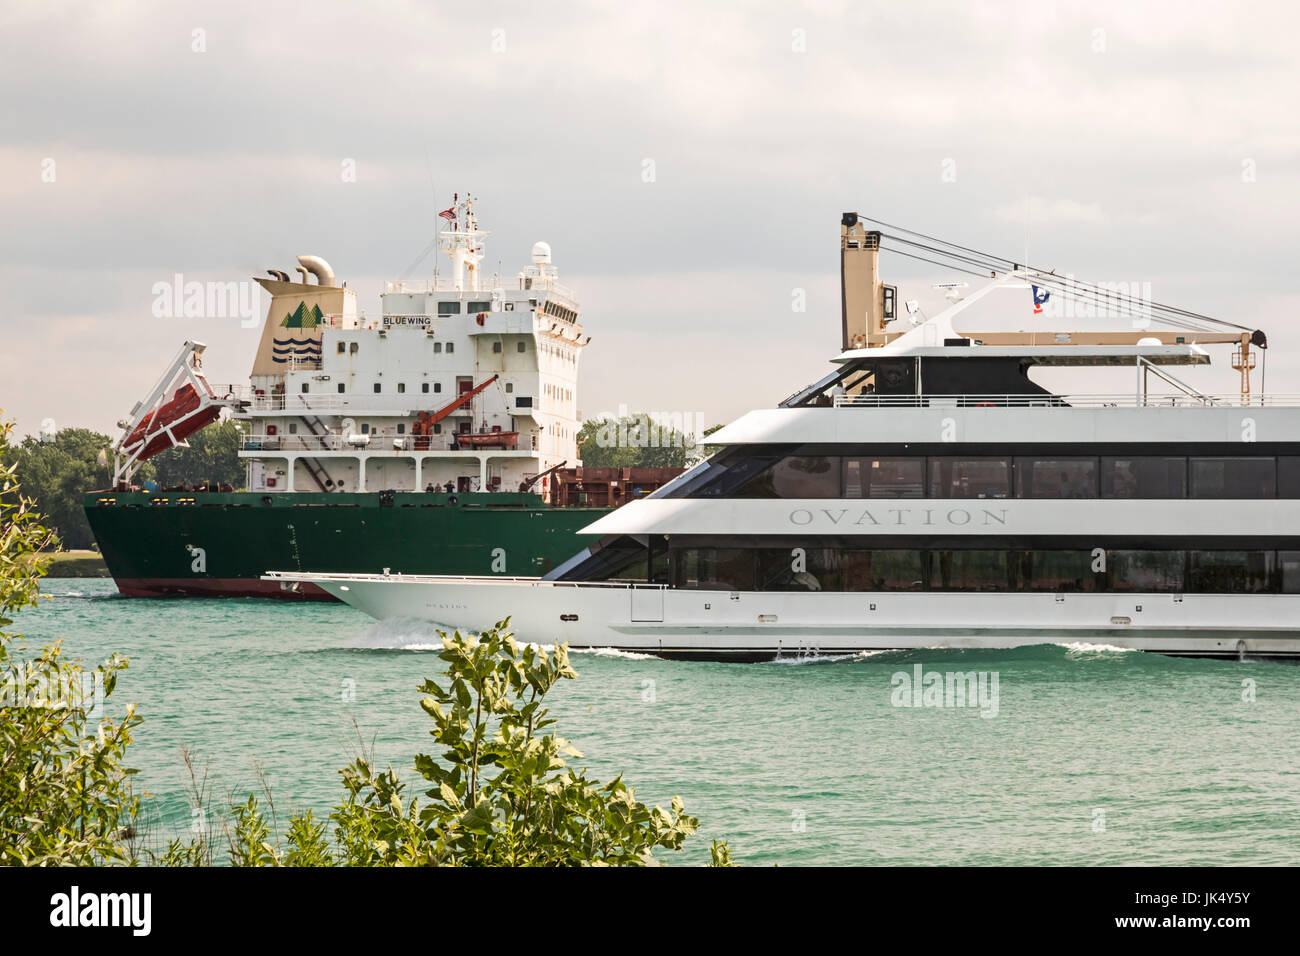 Detroit, Michigan - The Ovation, a luxury charter yacht, passes the Bluewing, a Great Lake bulk cargo vessel, on the Detroit River. Stock Photo